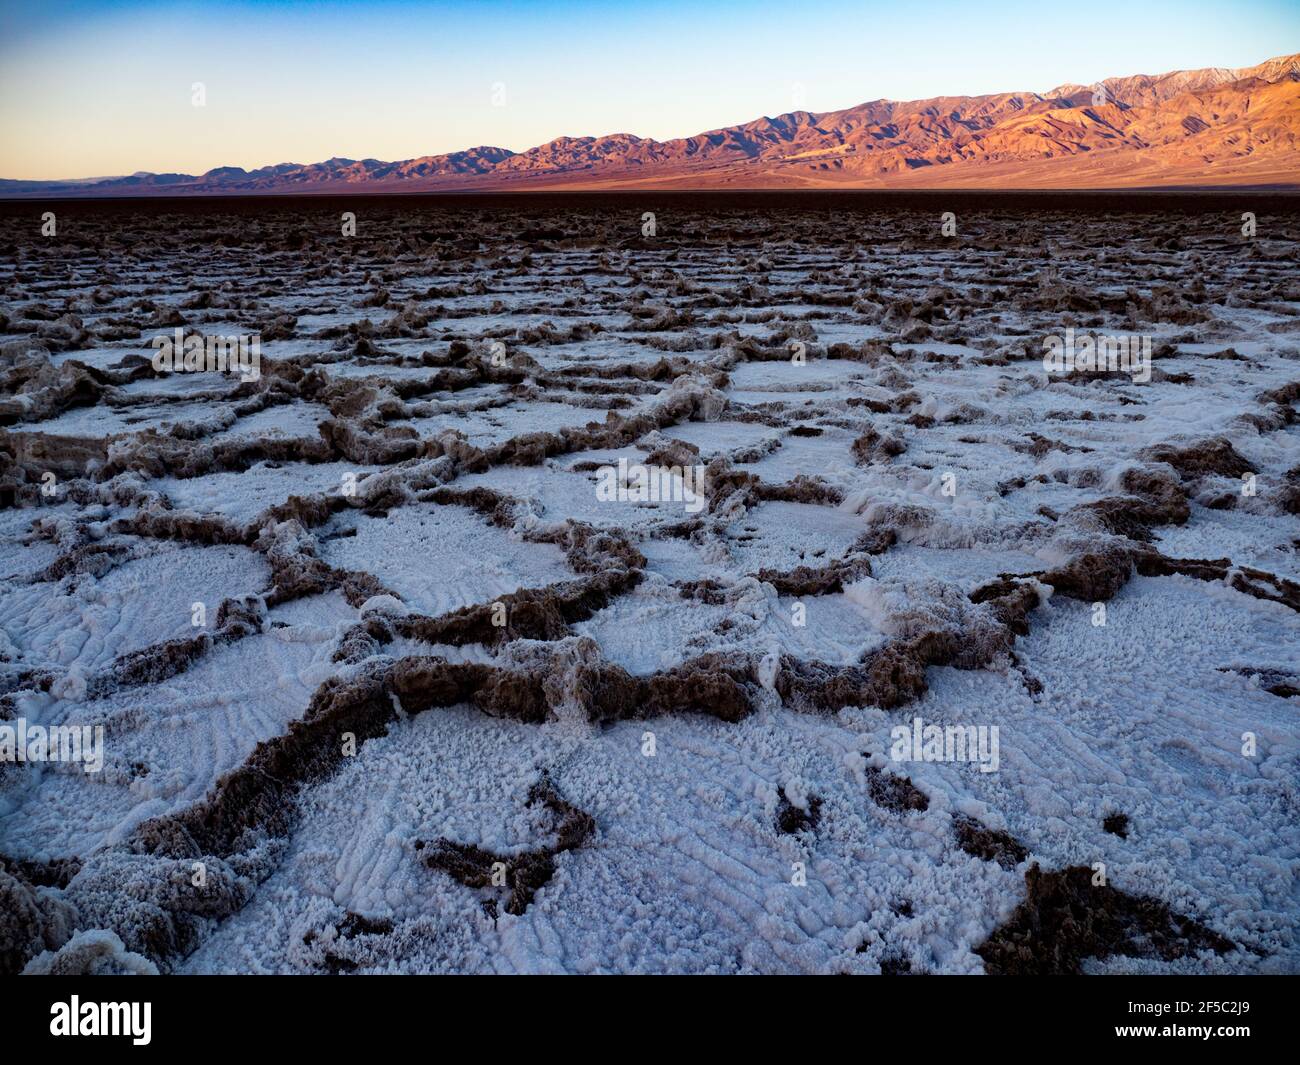 The salt flats at Badwater basin, the lowest point in the USA at Death Valley National Park, California, USA Stock Photo